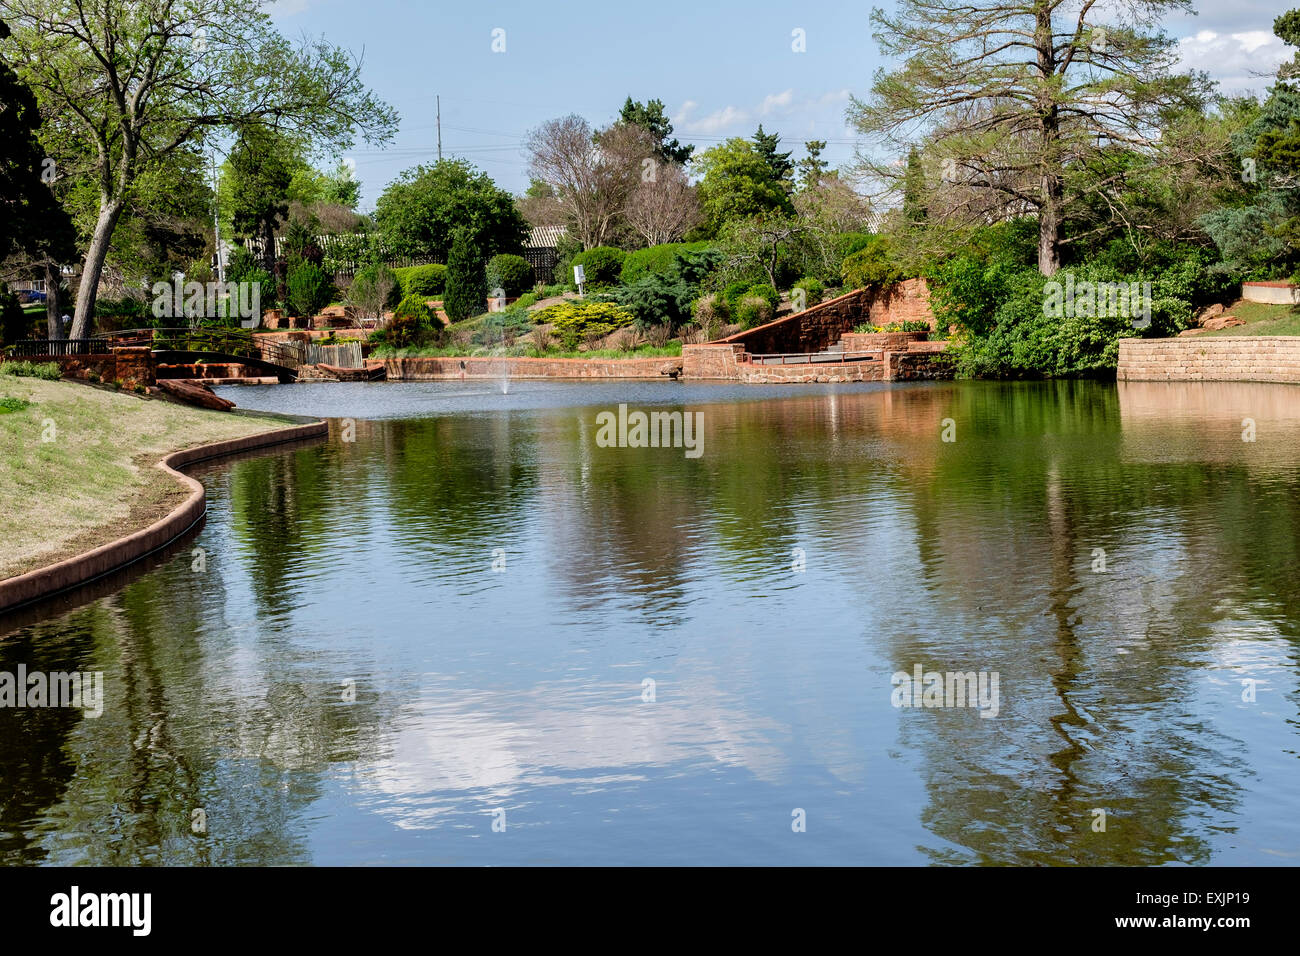 The pond and landscaping in Will Rogers park in Oklahoma City, Oklahoma, USA. Stock Photo